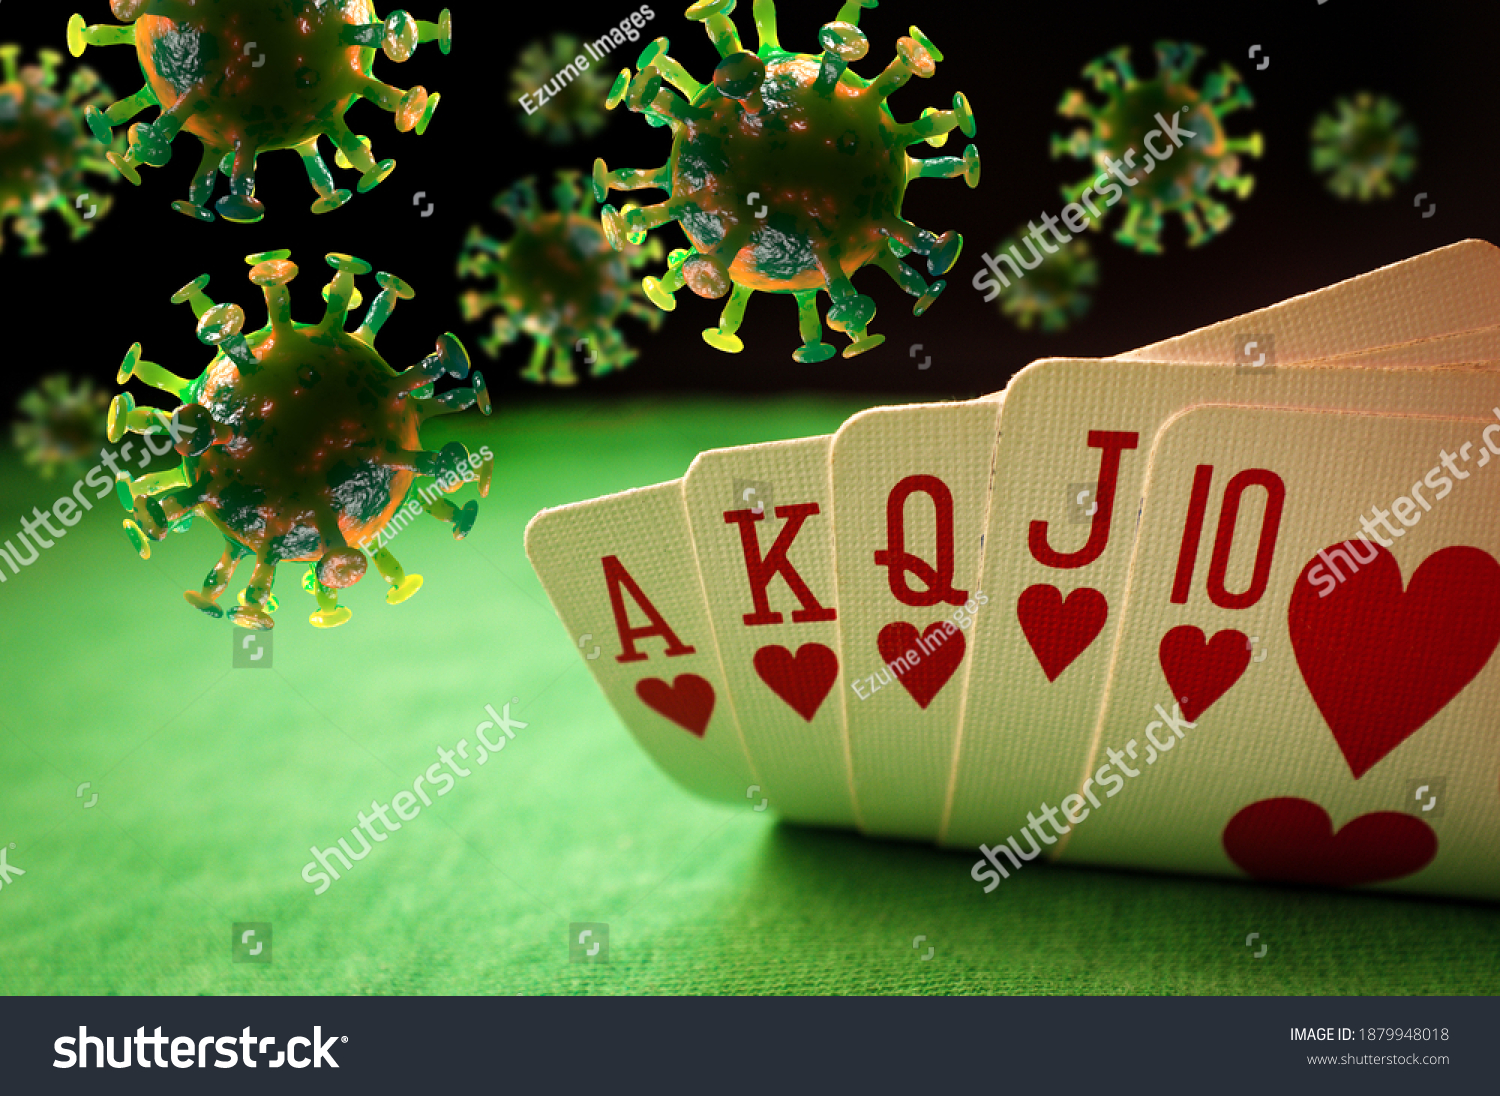 Poker winning hand royal flush with coronavirus cells as symbolic metaphor for a cure or vaccine for the virus #1879948018